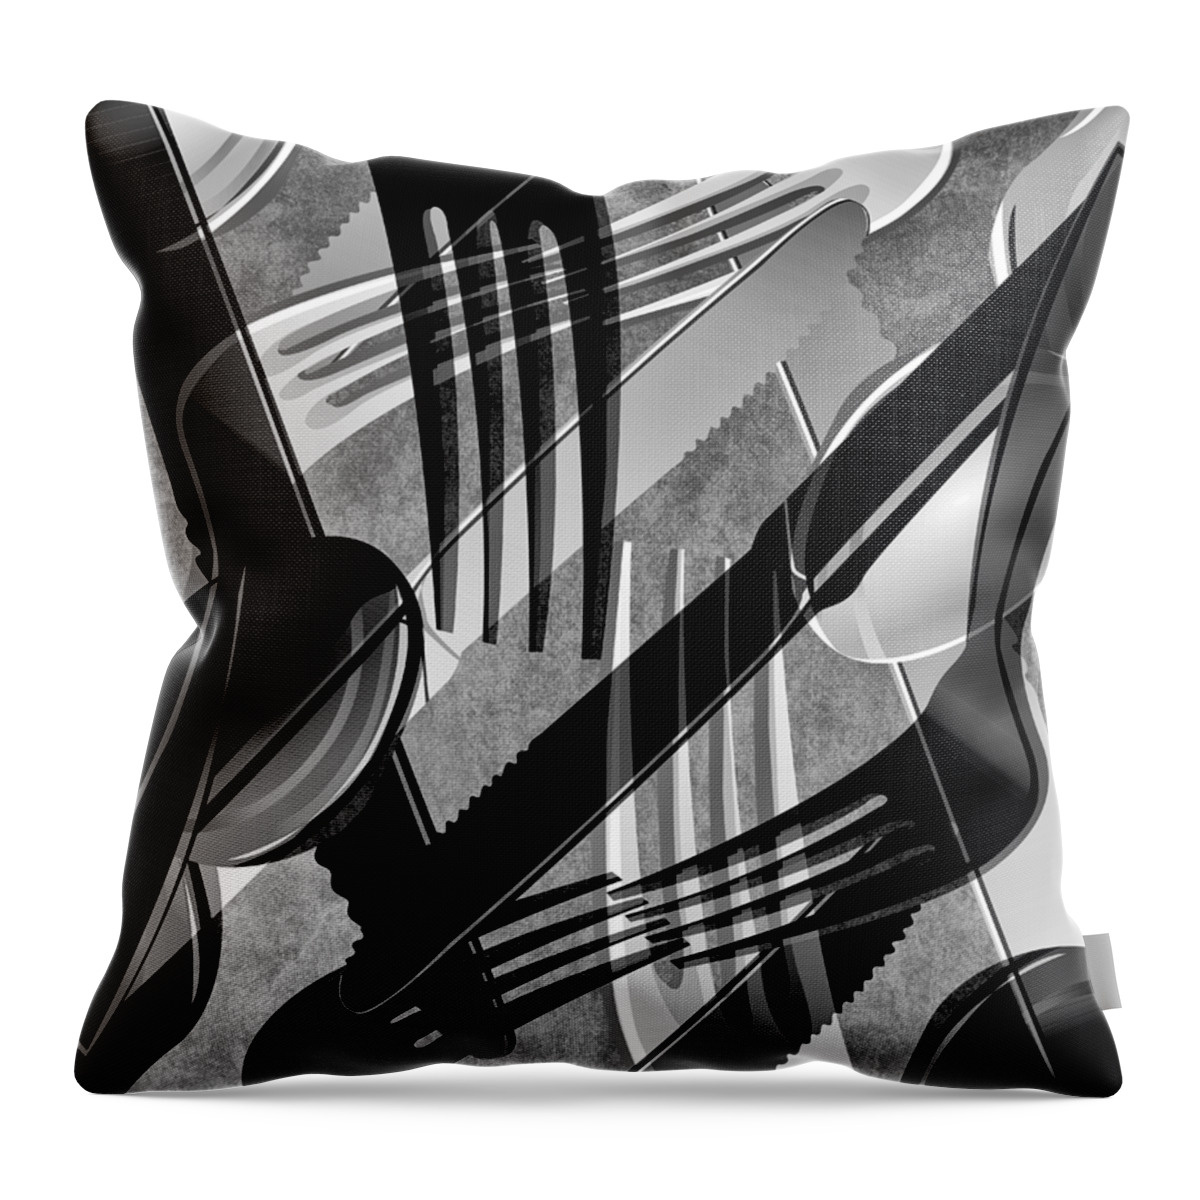 Texture Throw Pillow featuring the mixed media Fork Knife Spoon 9 by Angelina Tamez